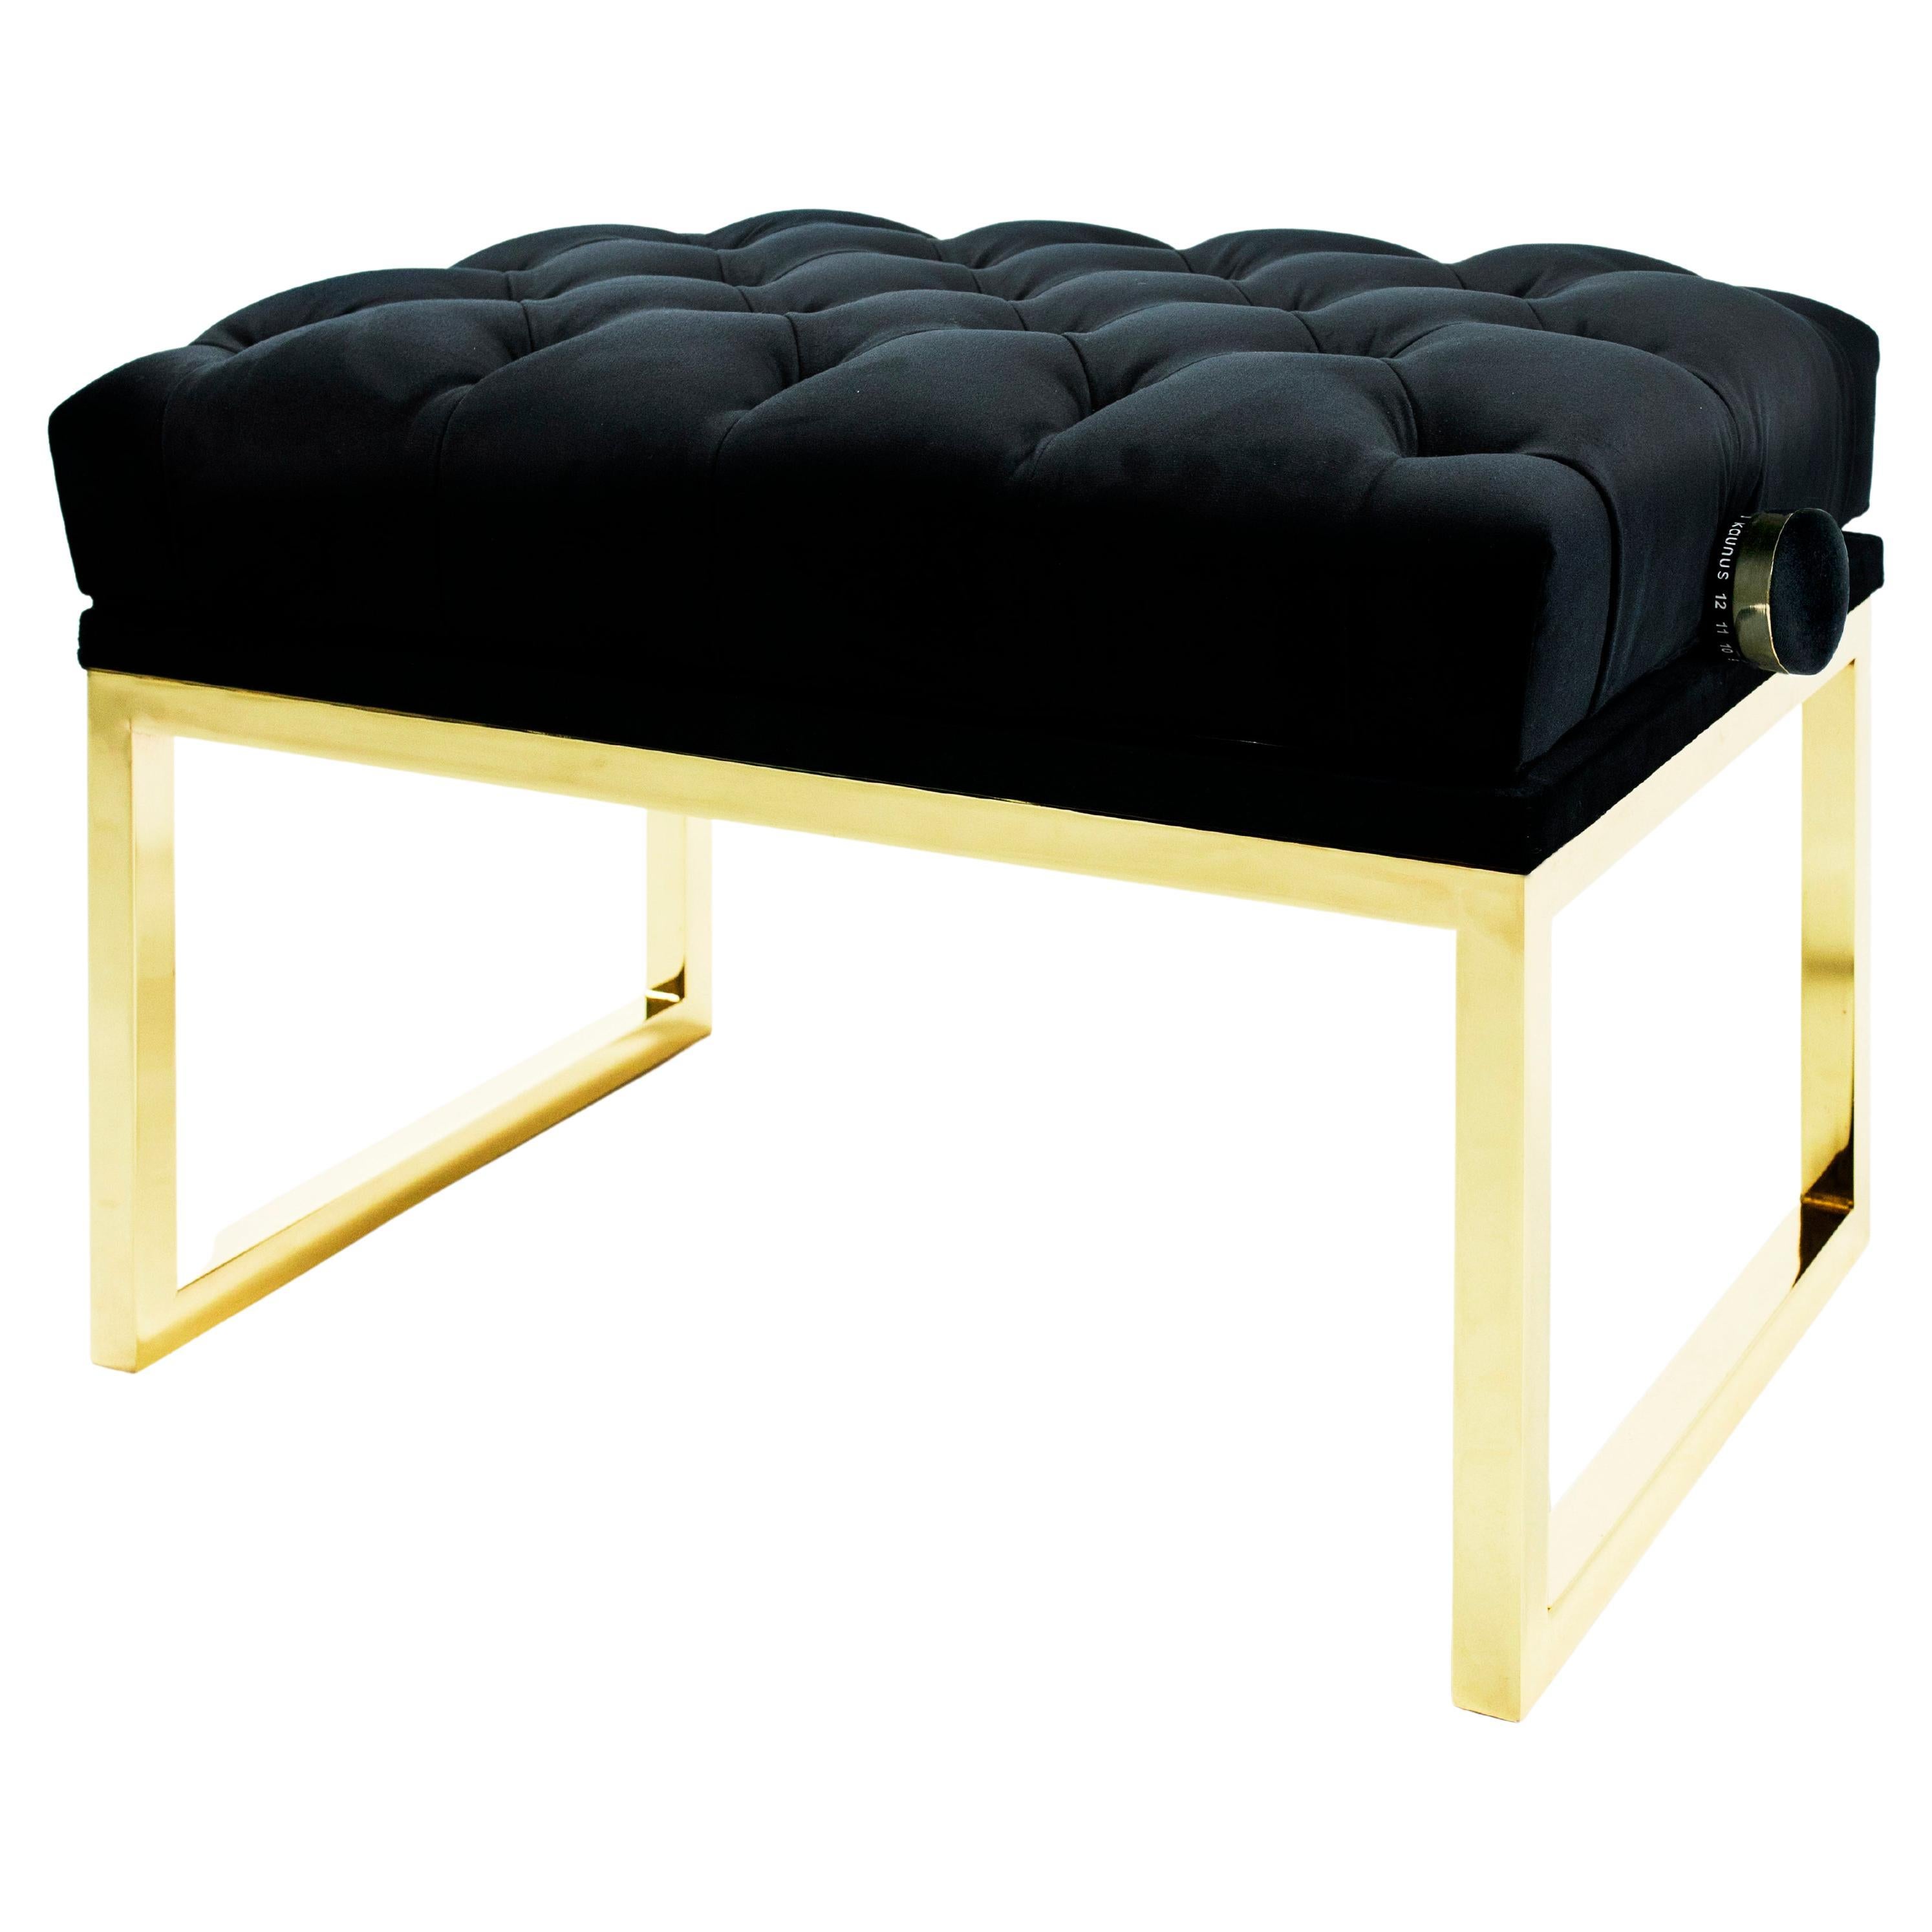 Upholstered Piano Bench Plated in Gloss Gold. Height Adjustable Piano Bench